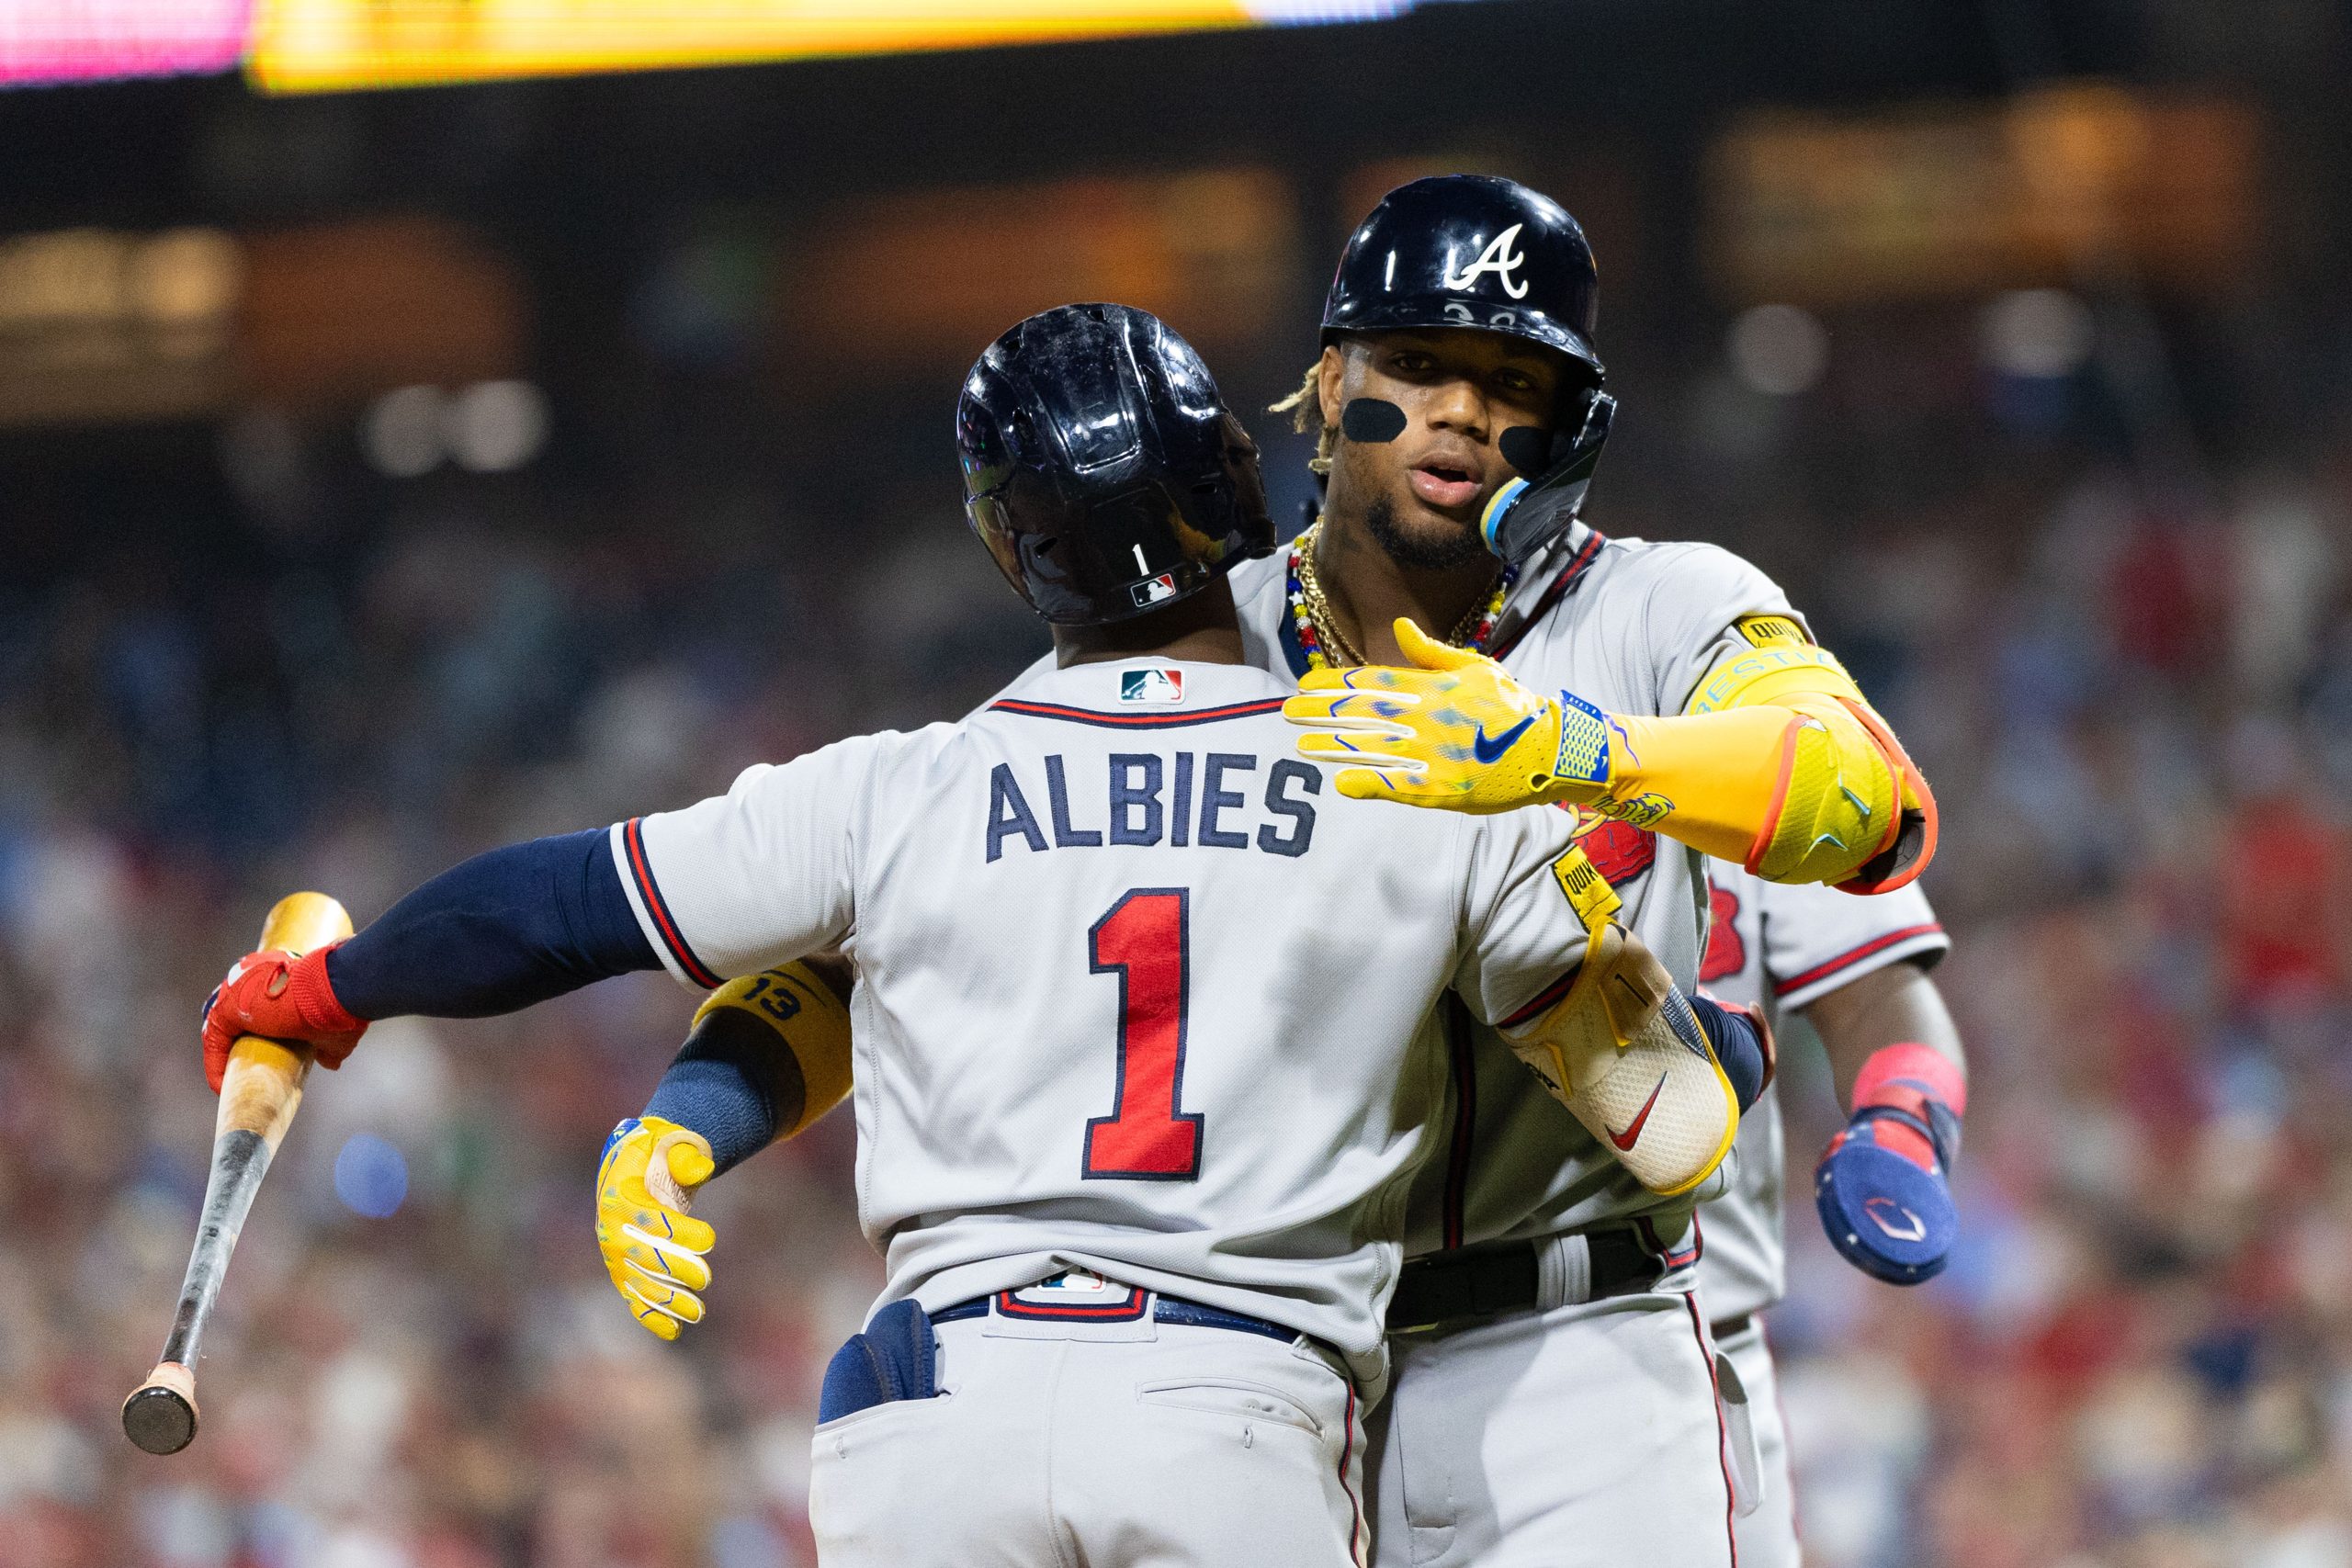 The Atlanta Braves Are Looking for Better Results This October